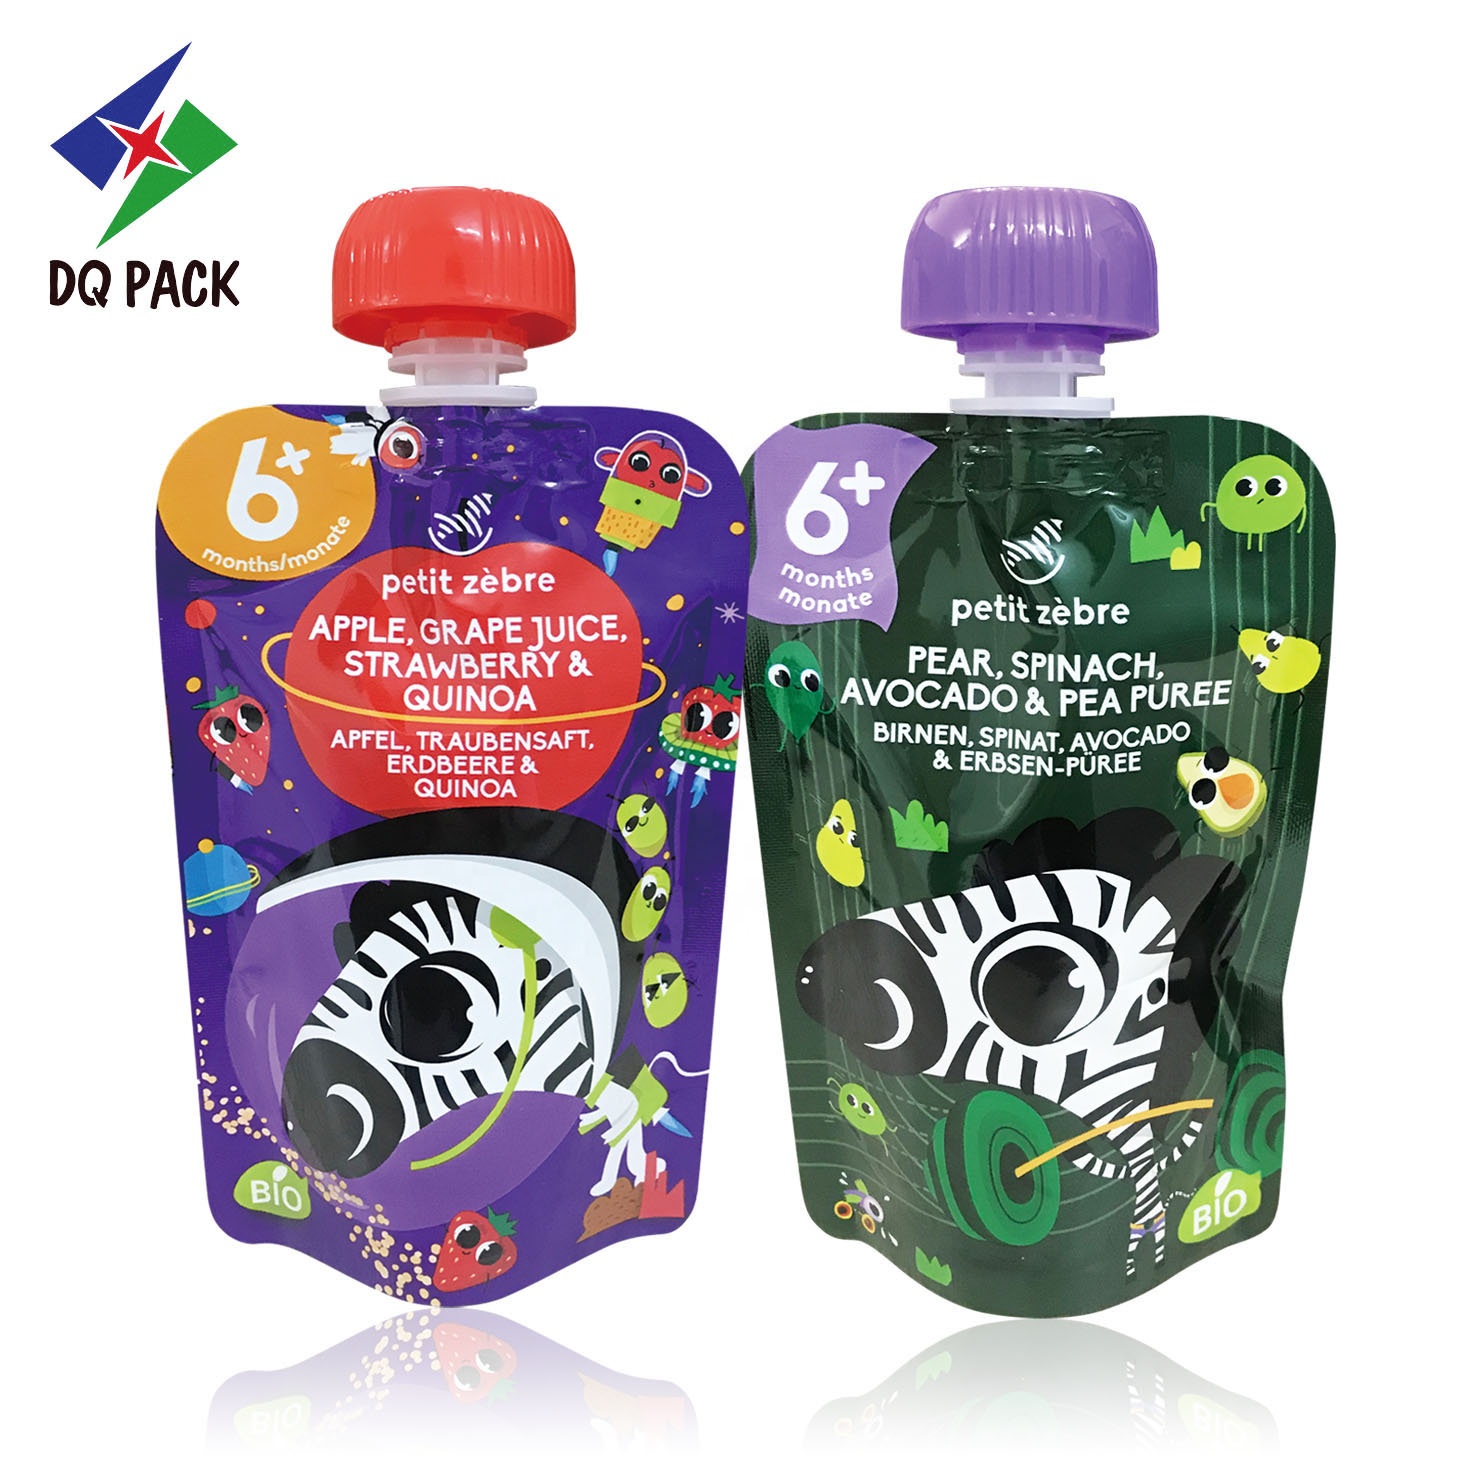 DQ PACK Fashionable Custom Liquid Packaging 90G Stand Up Pouch For Baby Food Juice